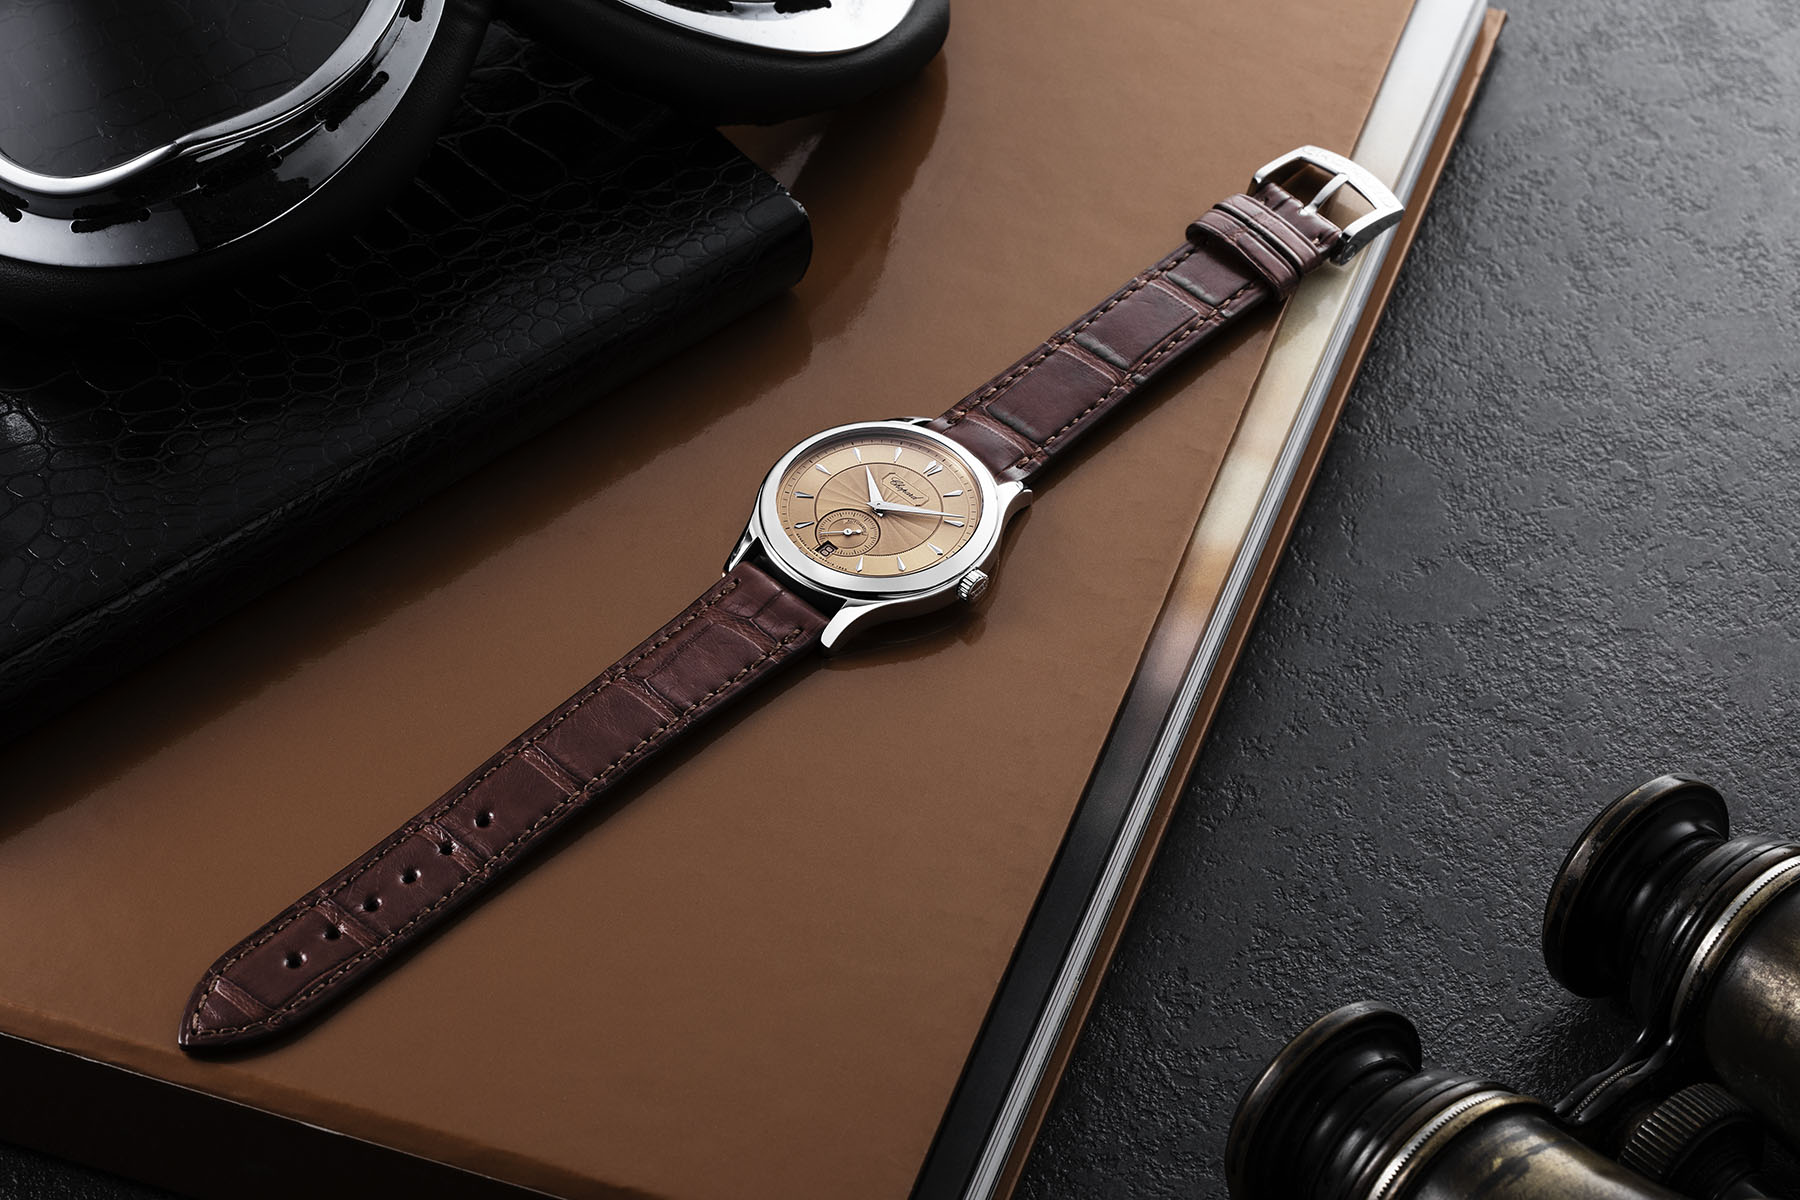 Chopard Returns To A Classic With The L.U.C. 1860 In Lucent Steel